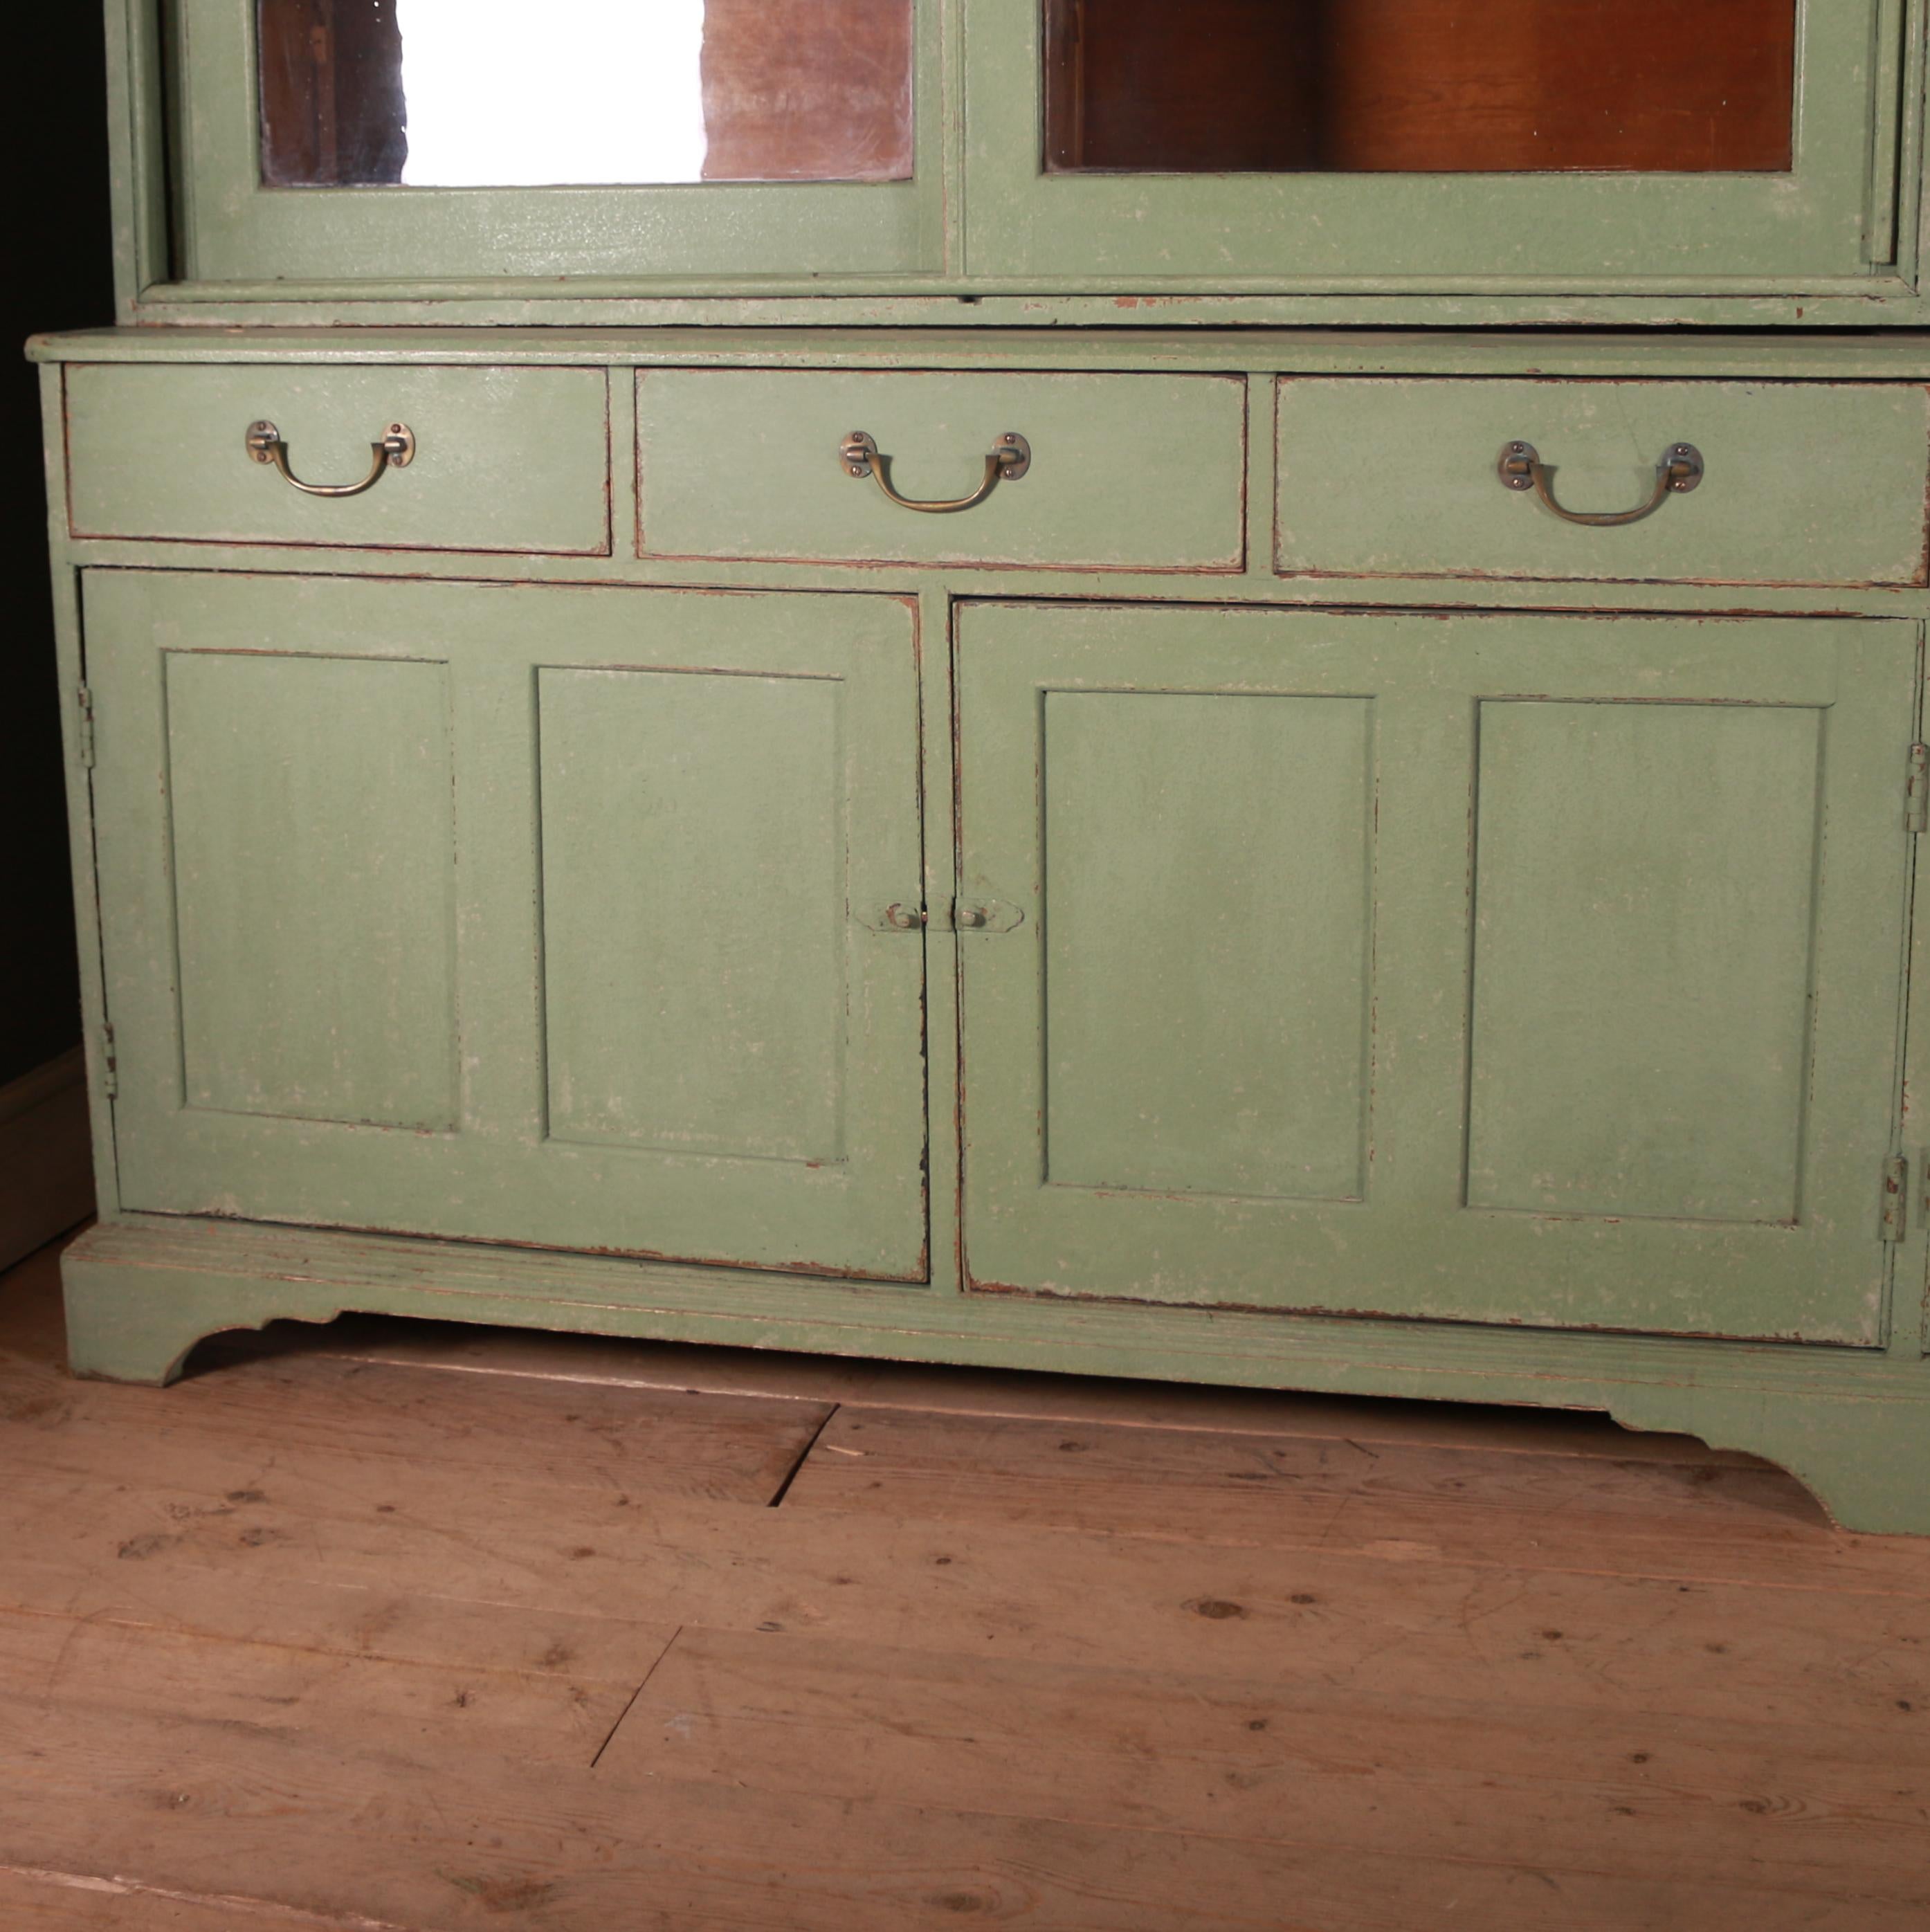 Stunning mid 19th C English painted kitchen dresser with glazed sliding doors and adjustable shelving to the top section. 1840

The top section comes off the base for transport.

Reference: 7554

Dimensions
130 inches (330 cms) Wide
24